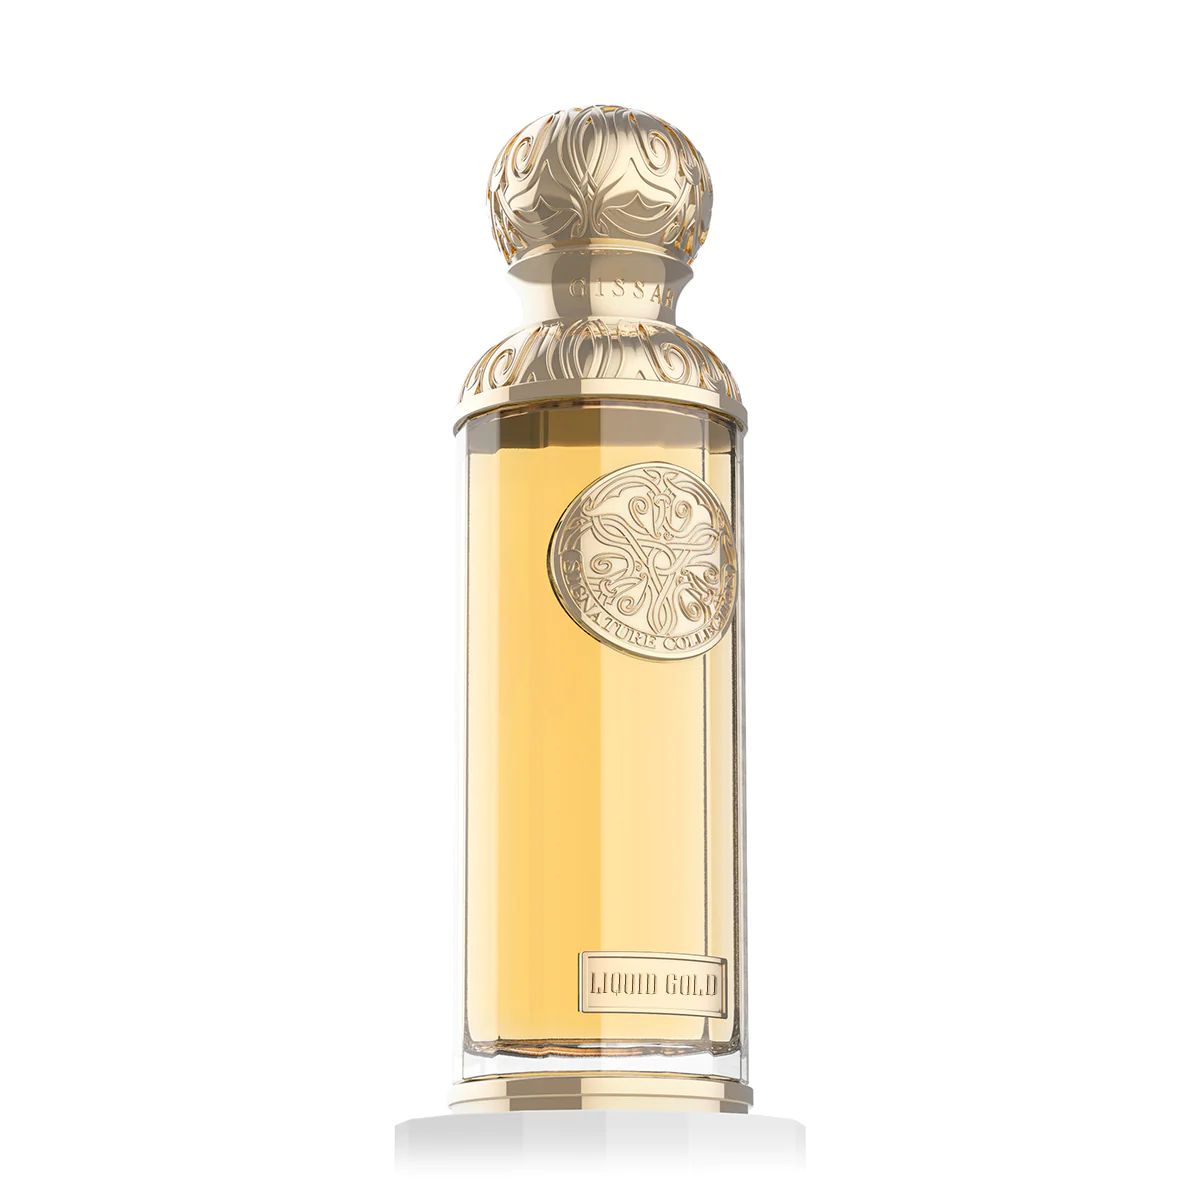 Liquid Gold Gissah perfume - a fragrance for women and men 2020